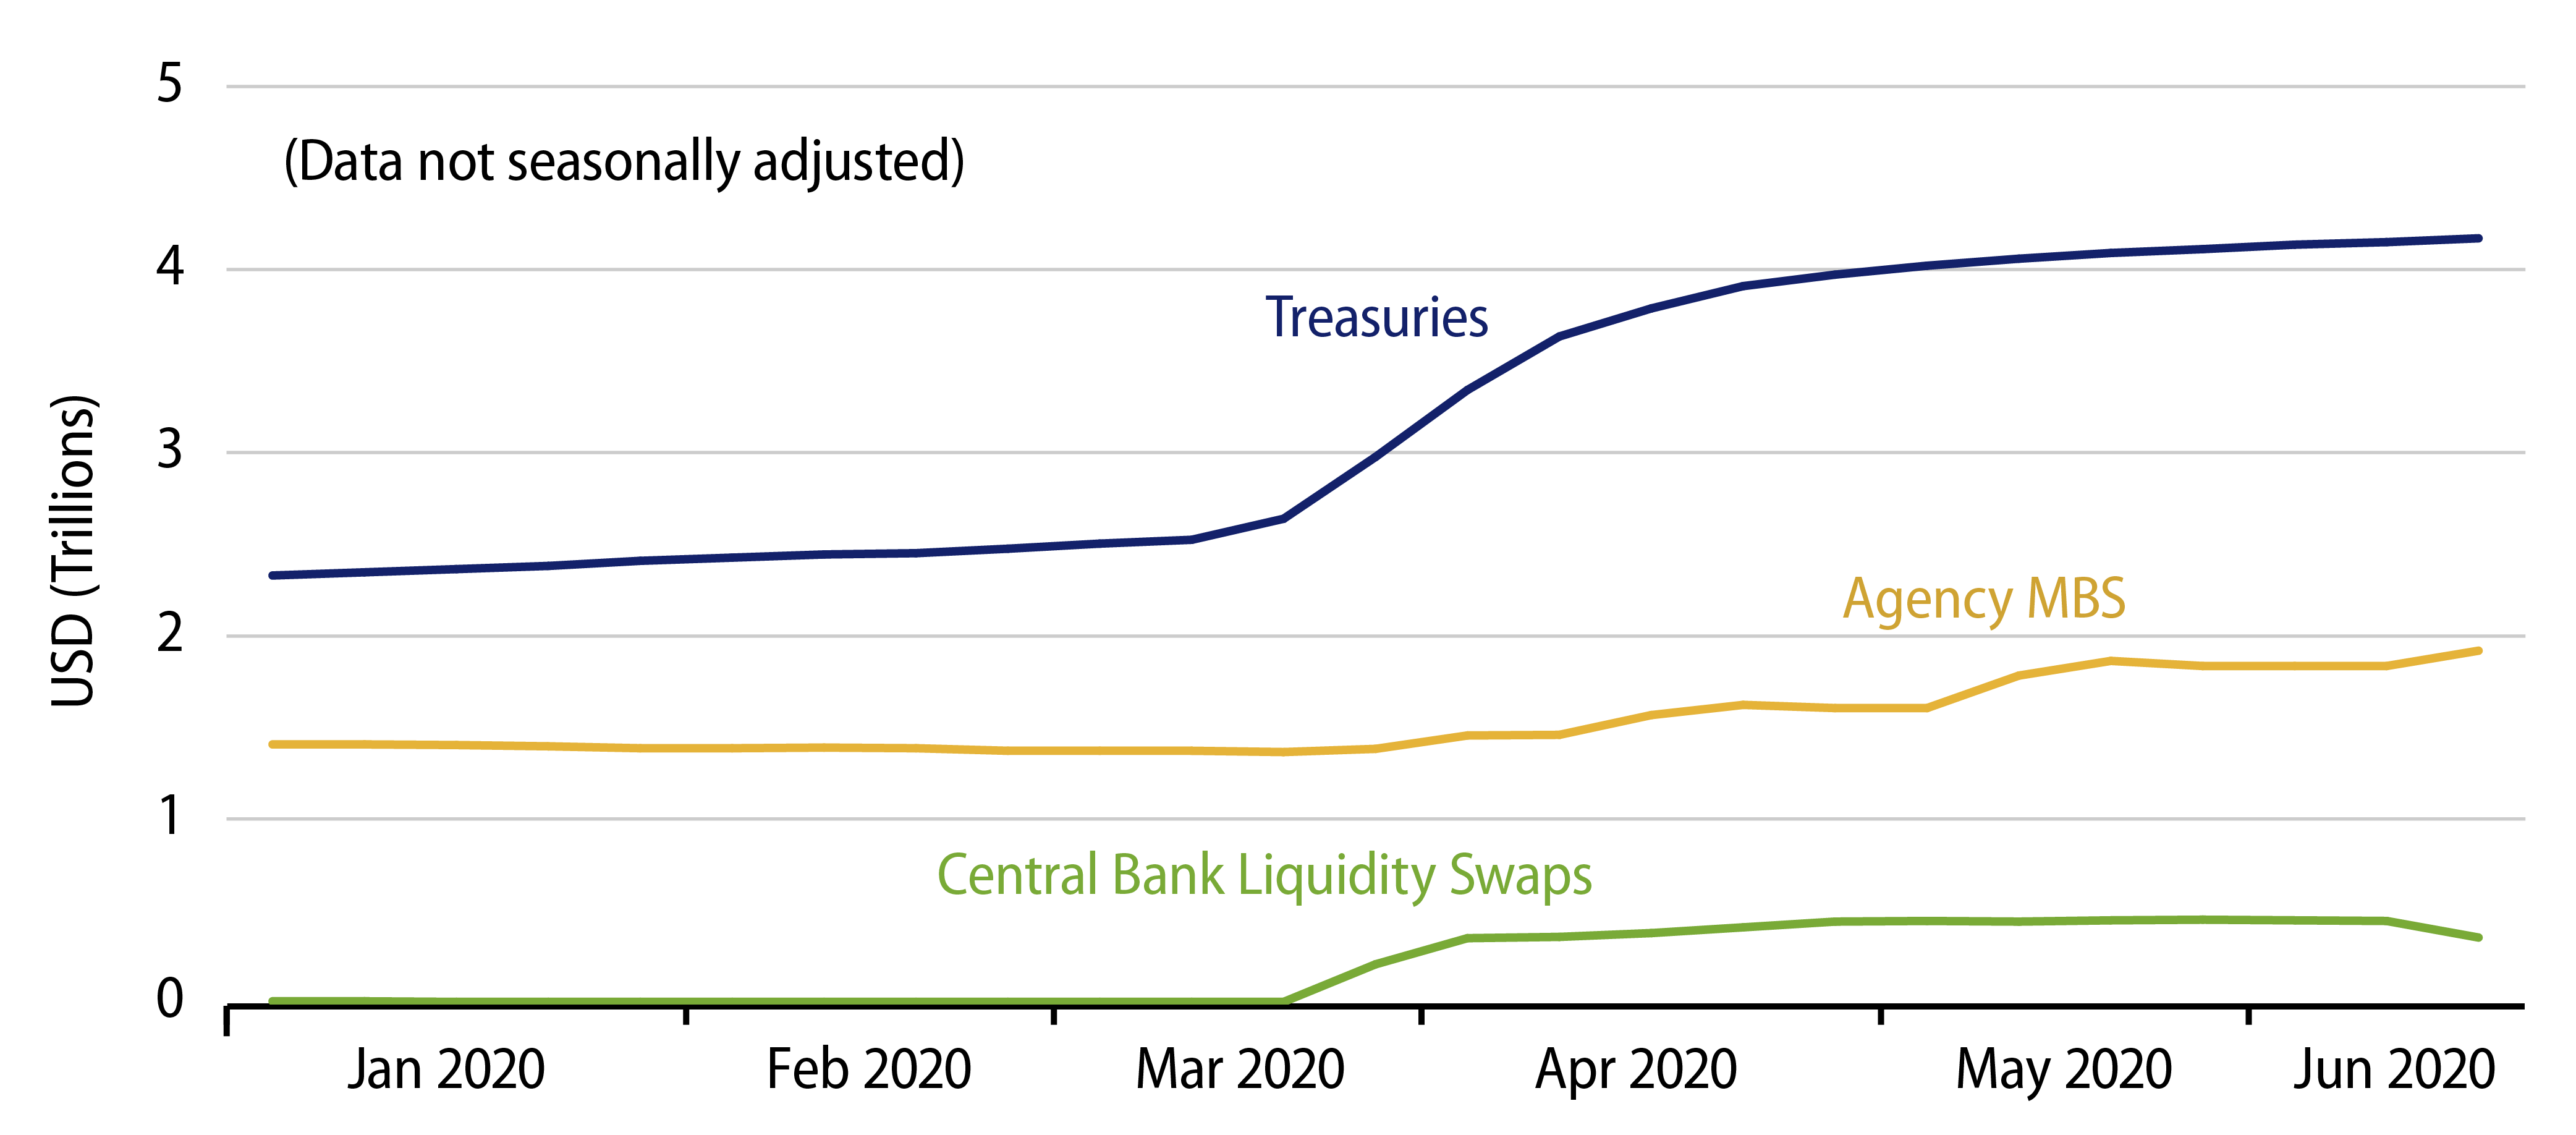 Conventional Provisions of Liquidity During COVID Crisis